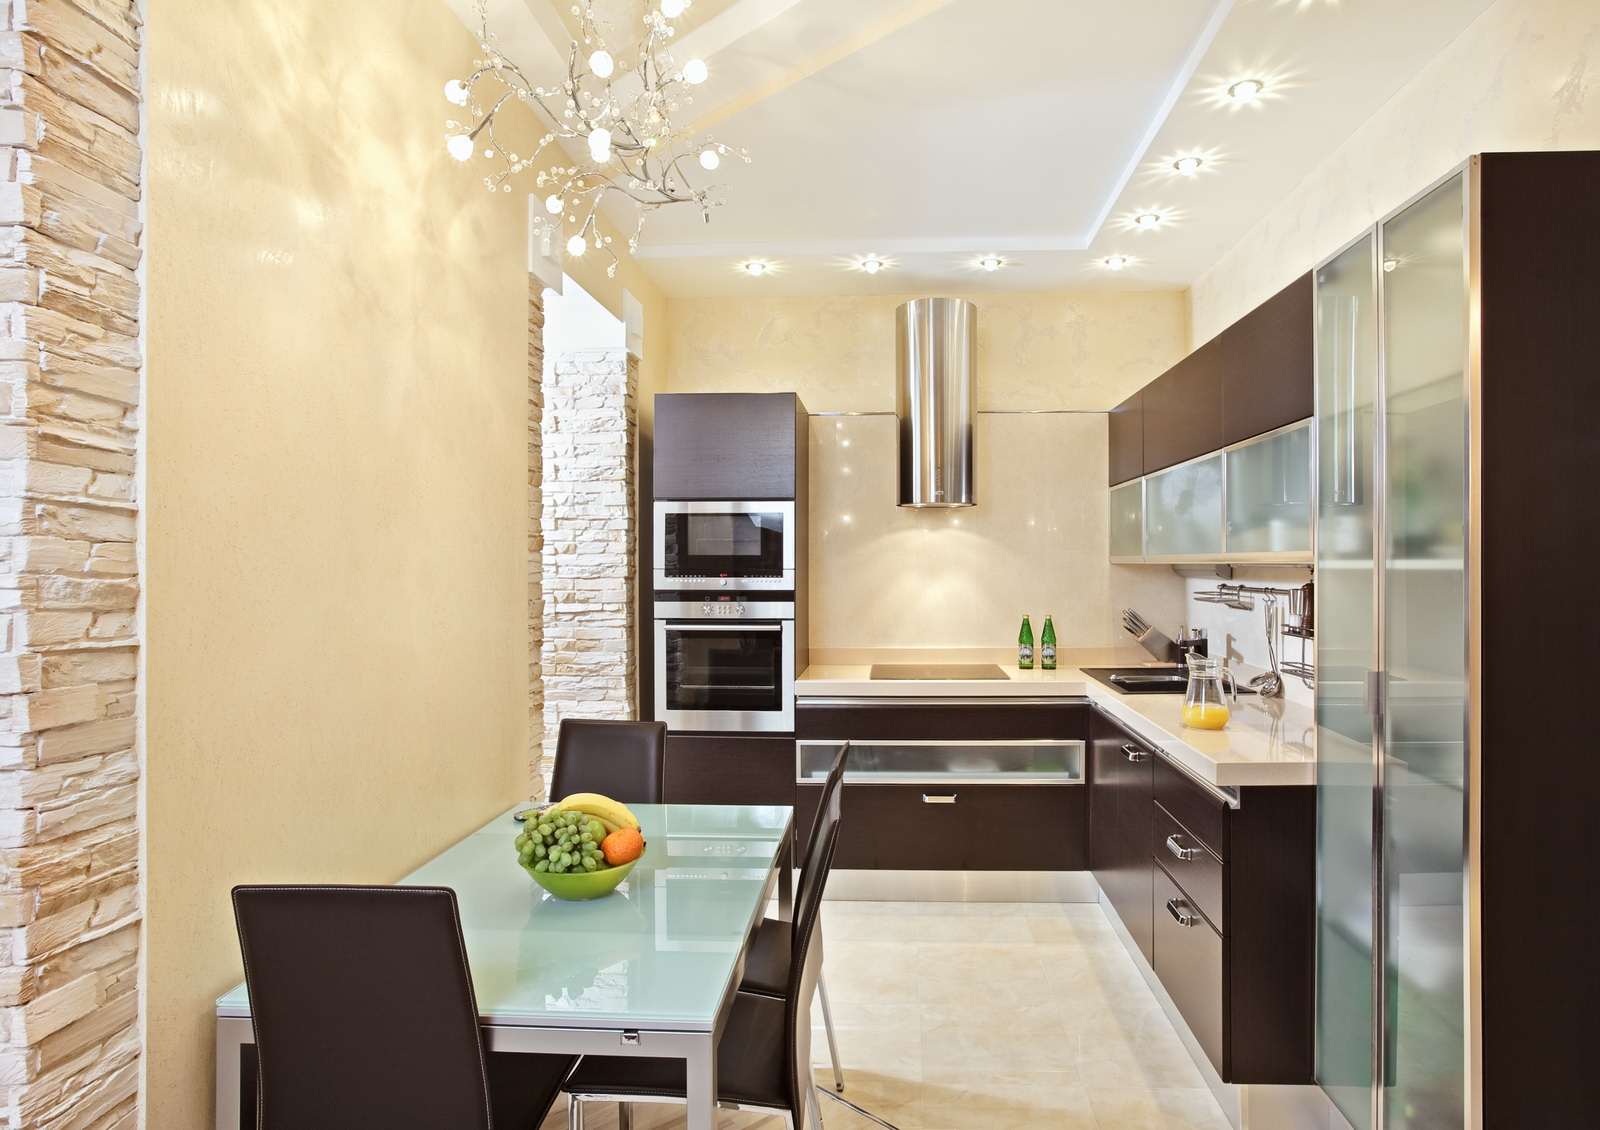 large refrigerator in the design of the kitchen in white